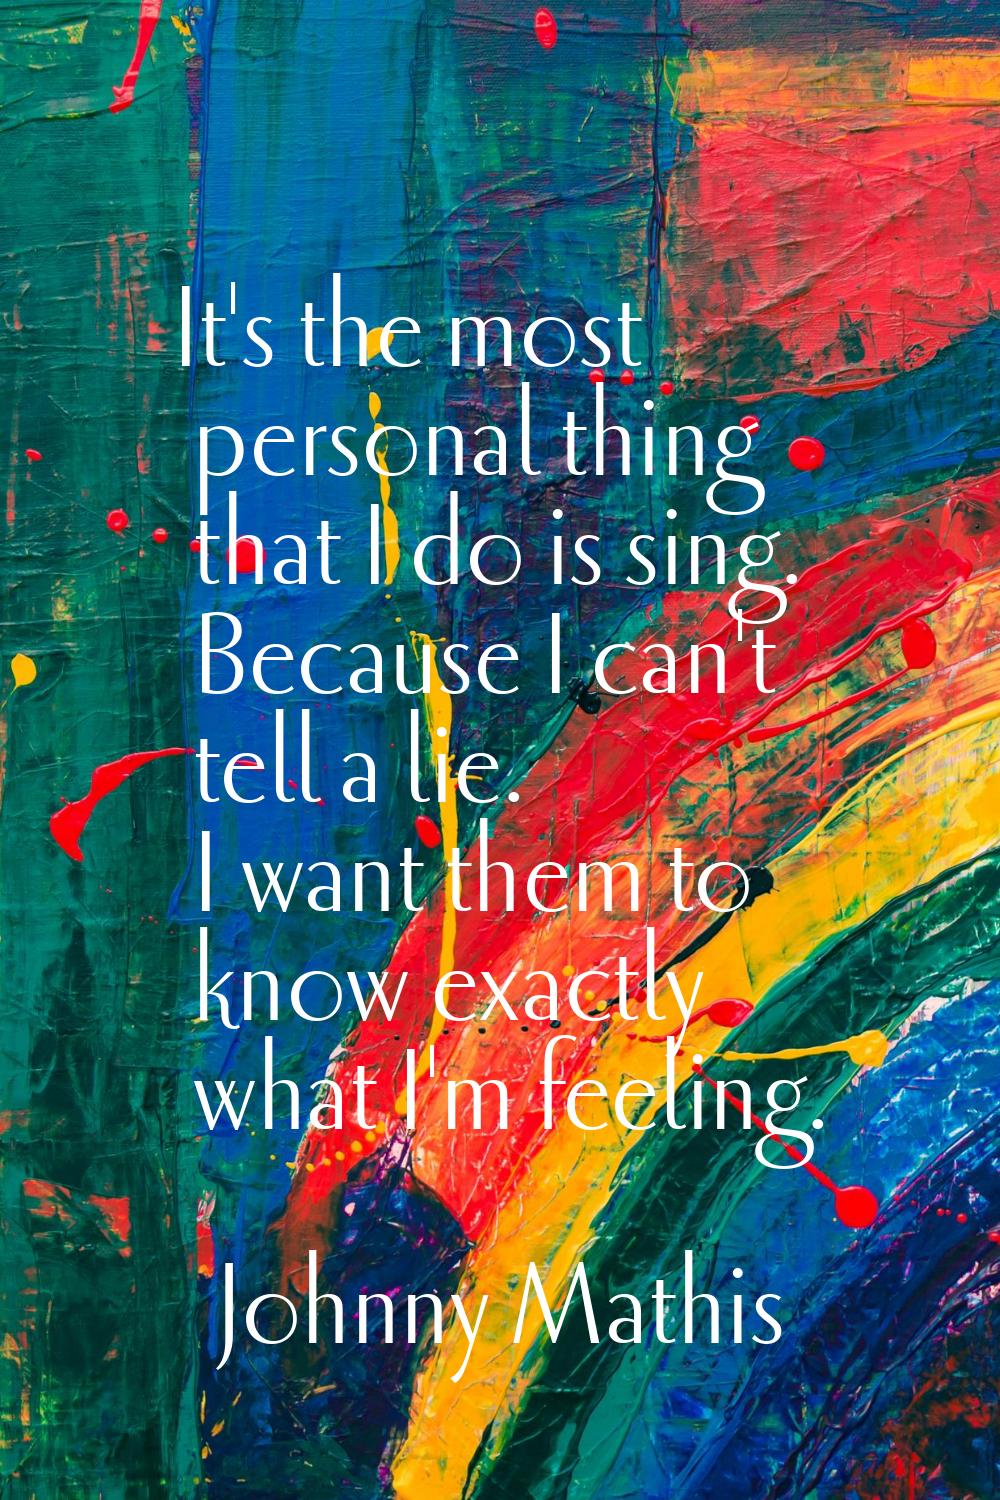 It's the most personal thing that I do is sing. Because I can't tell a lie. I want them to know exa